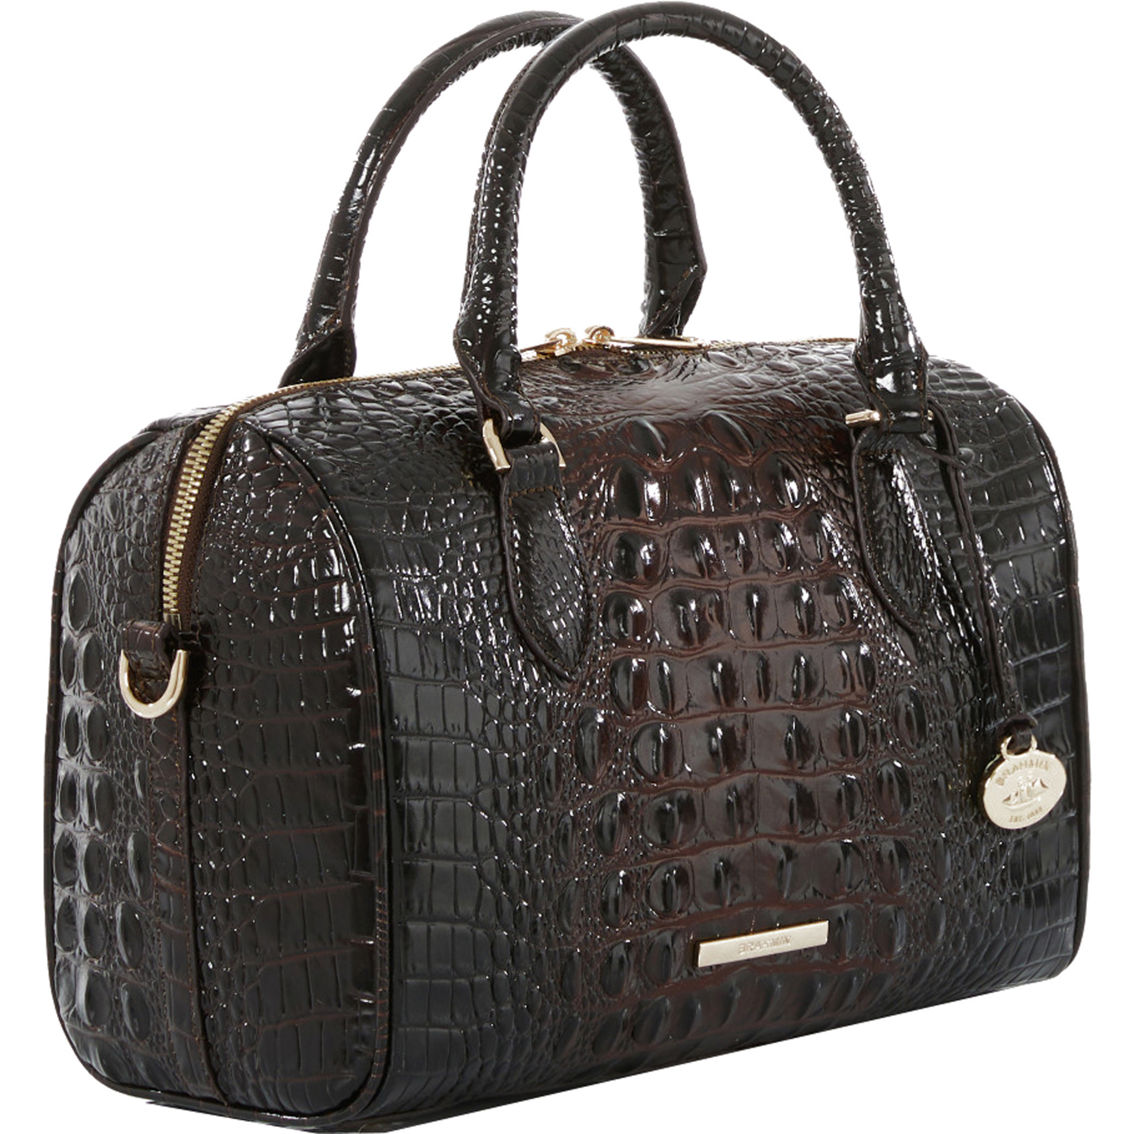 Brahmin Cocoa Ombre Melbourne Stacy Satchel - Image 3 of 4